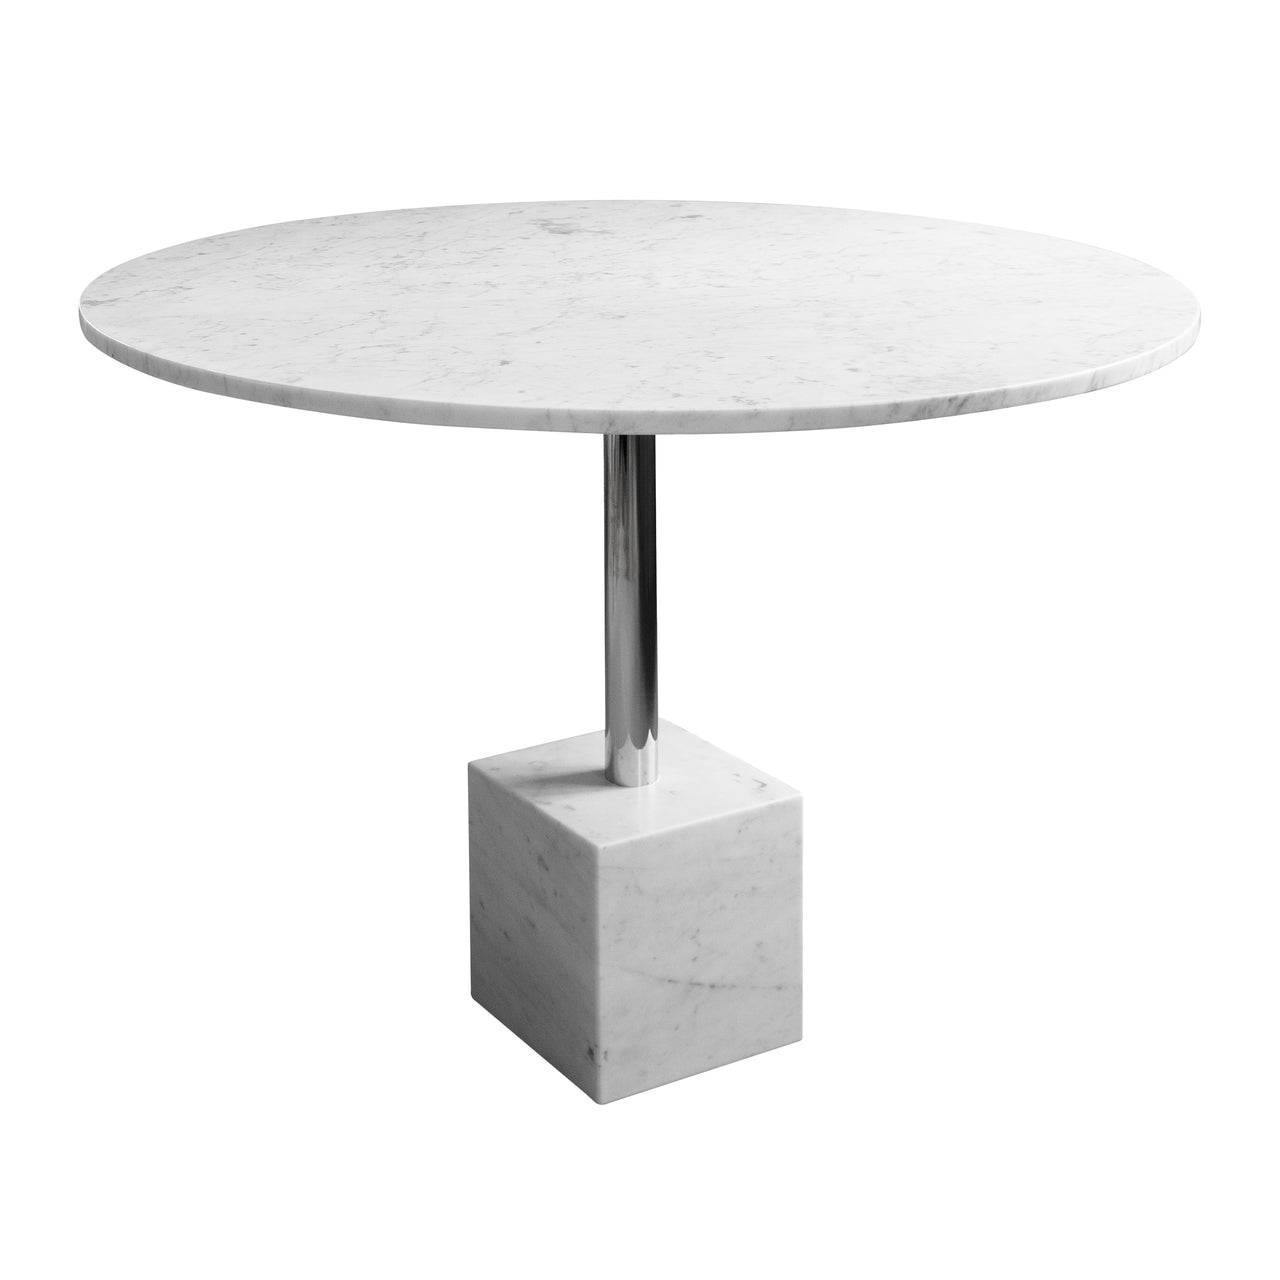 Knockout Dining Table: White Marble + Chrome